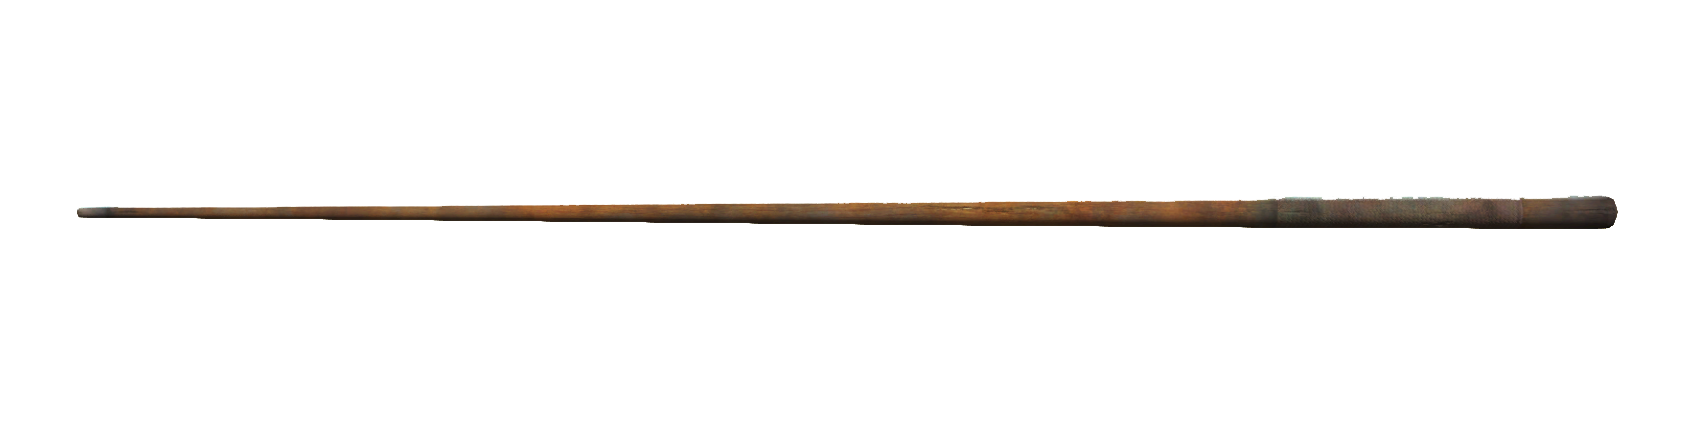 Fallout4 Pool Cue.png - Cue, Transparent background PNG HD thumbnail